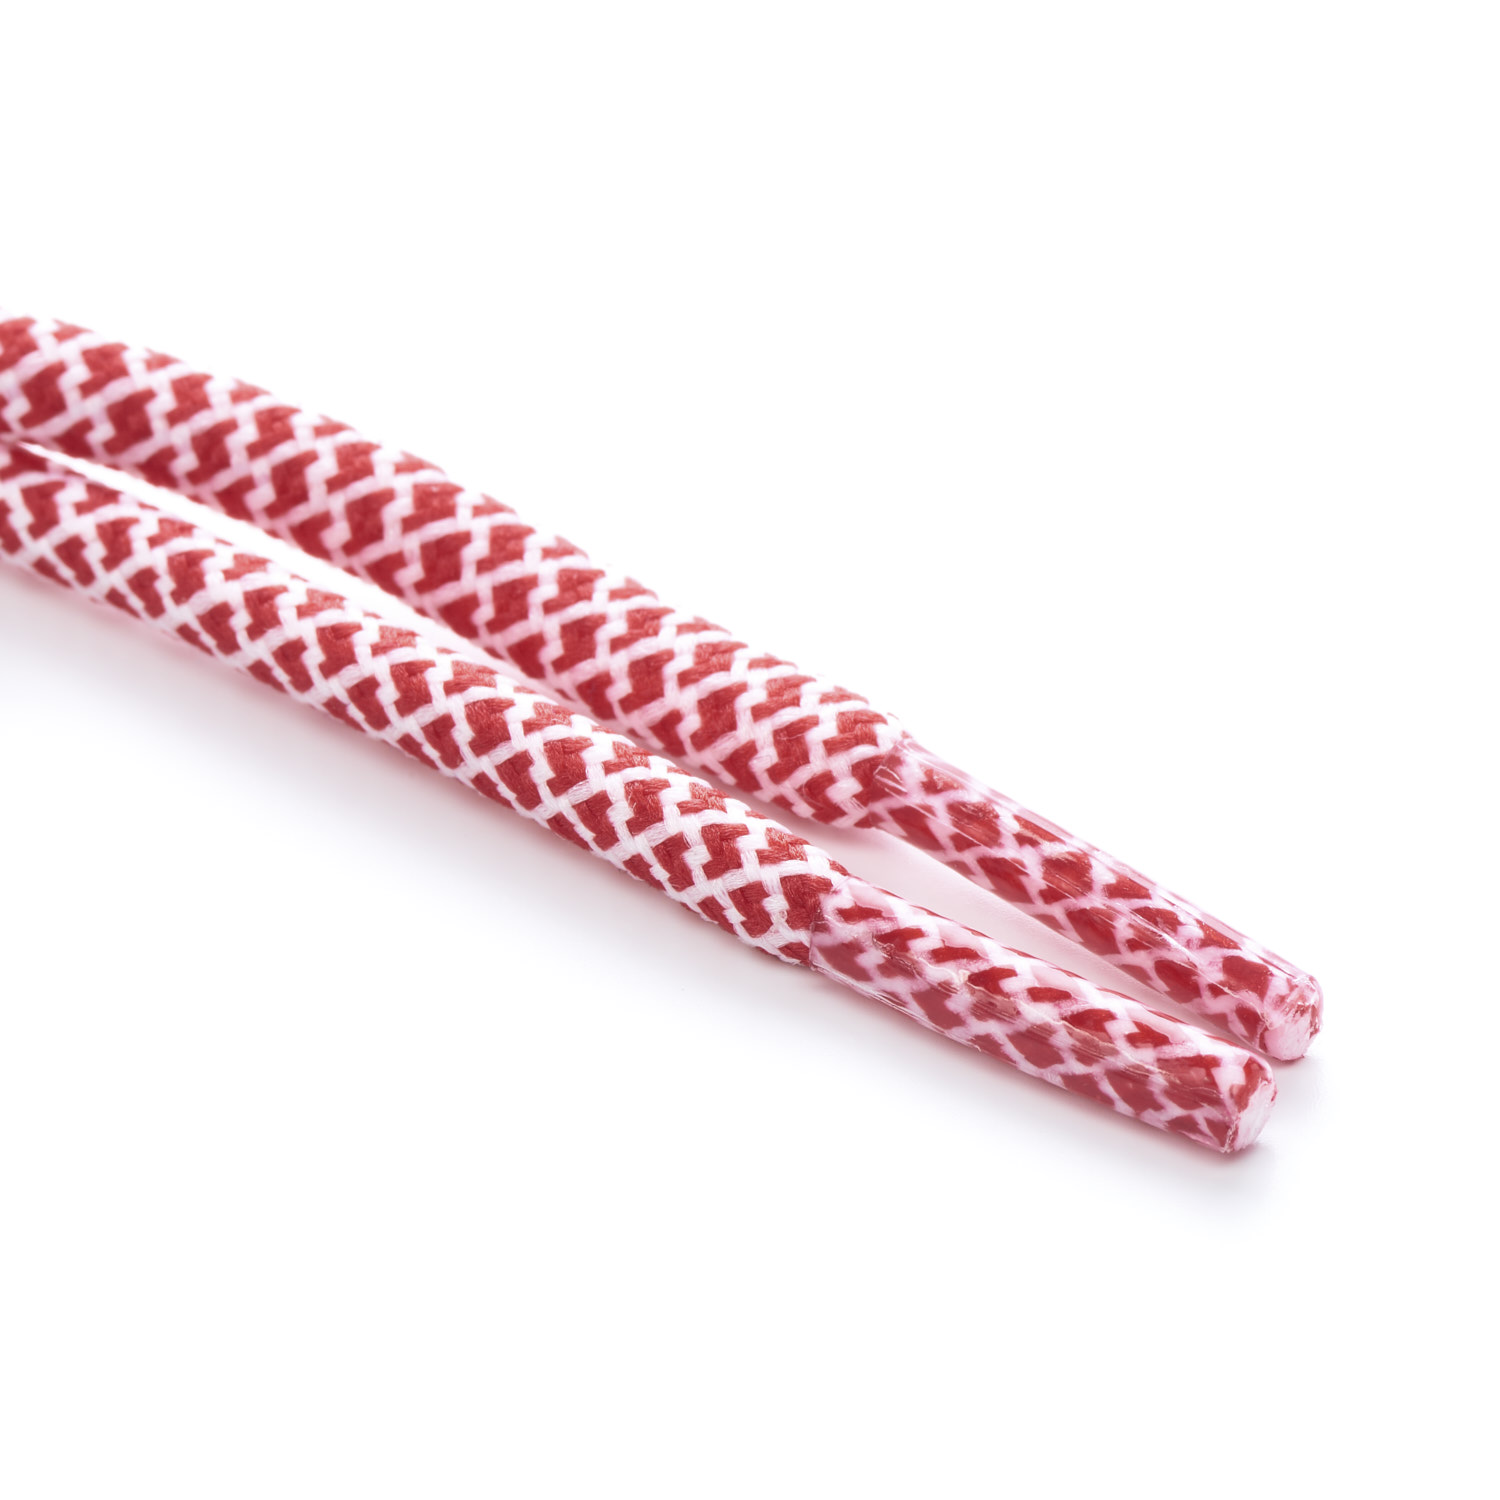 5mm Round Cord Honeycomb Shoe Laces Red & White